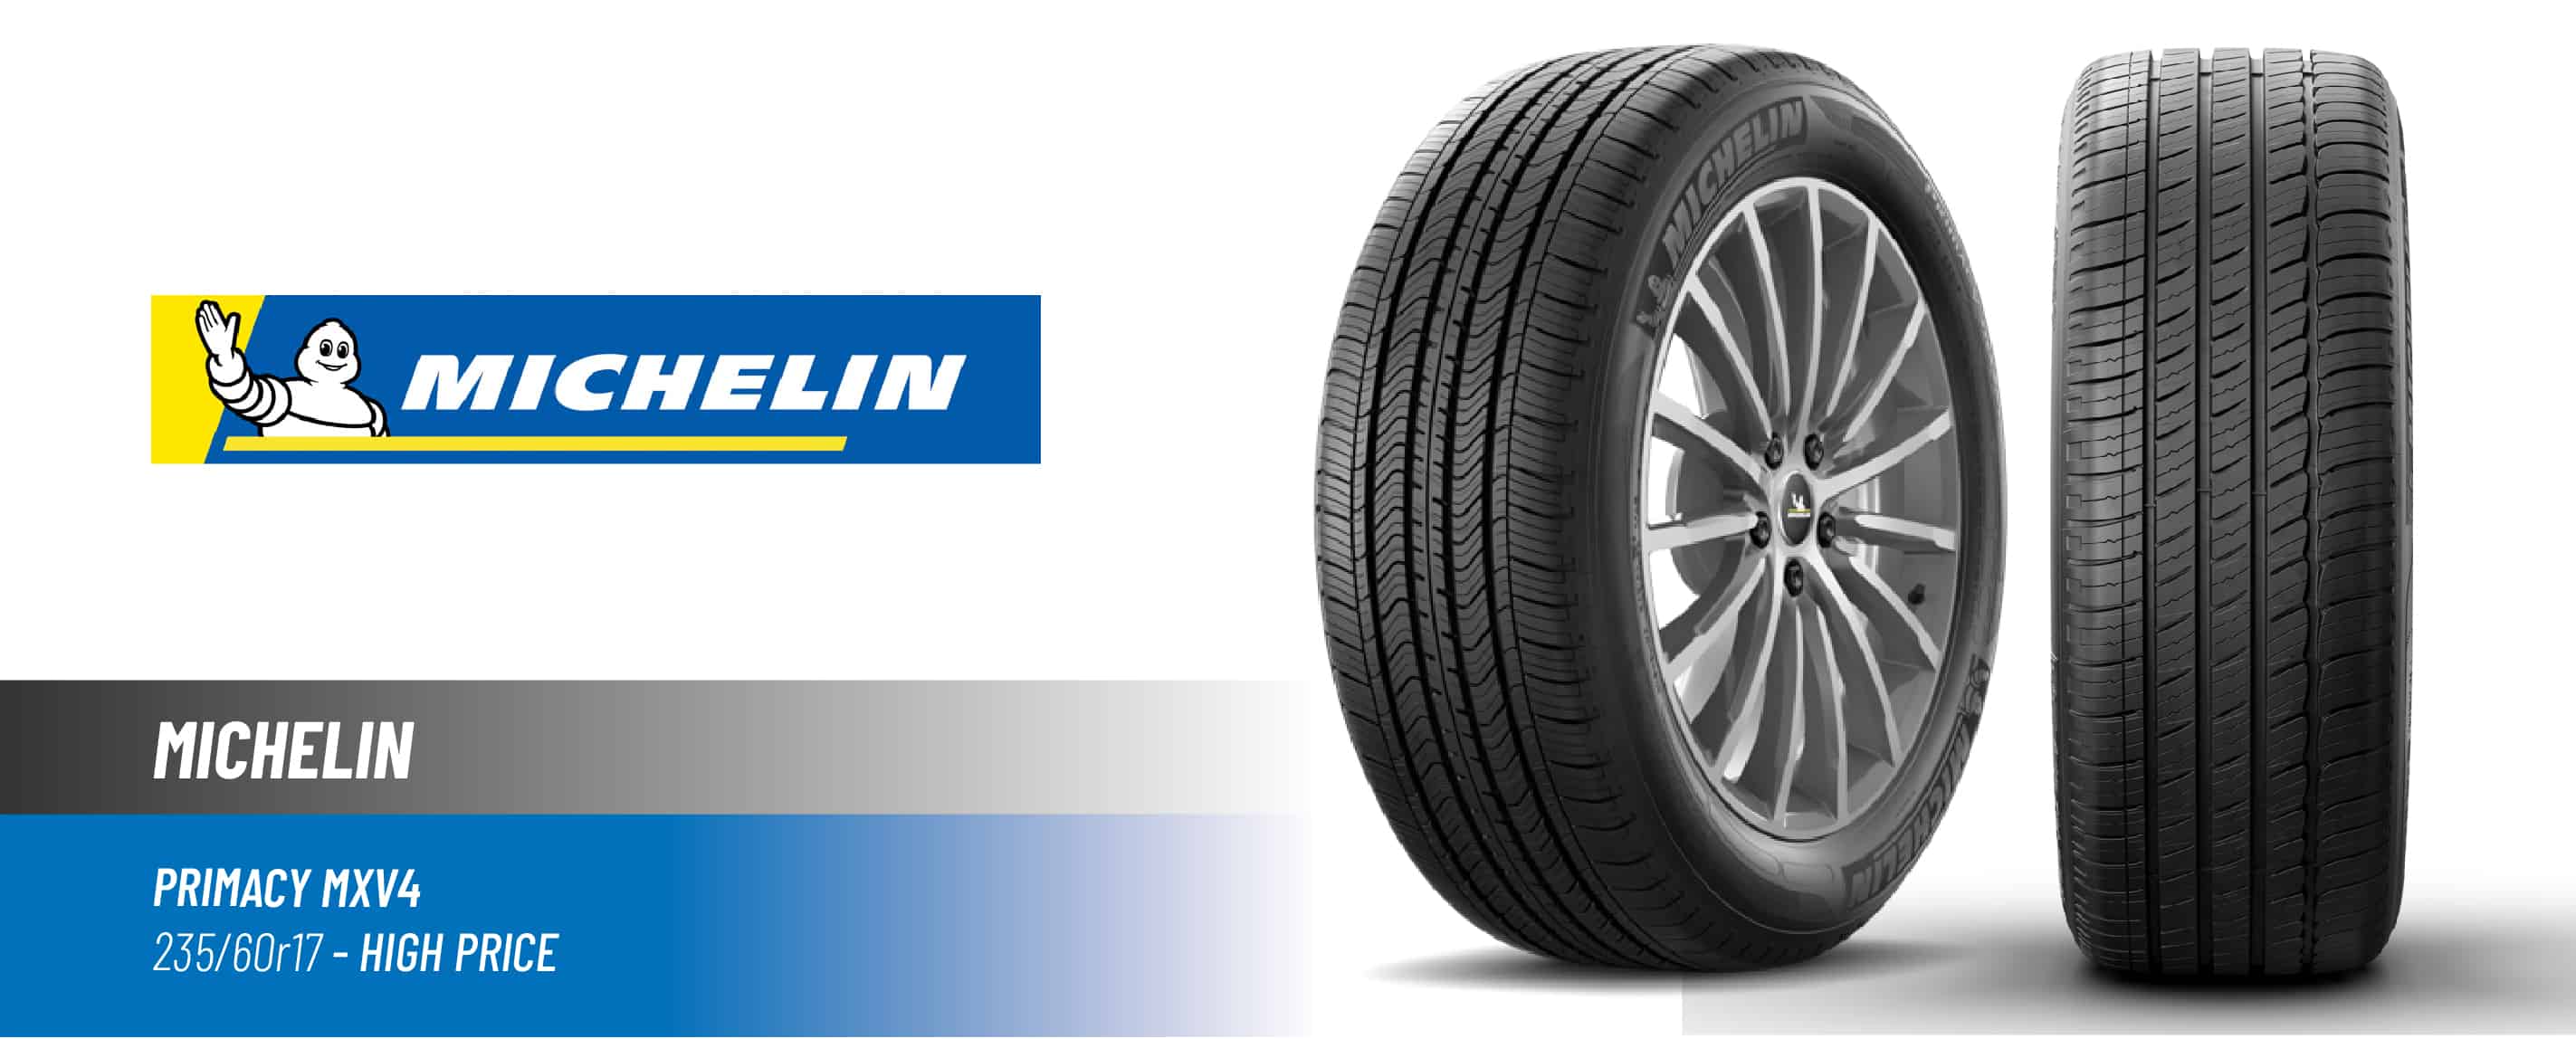 Top#2 High Price: Michelin Primacy MXV4 – best 235/60r17